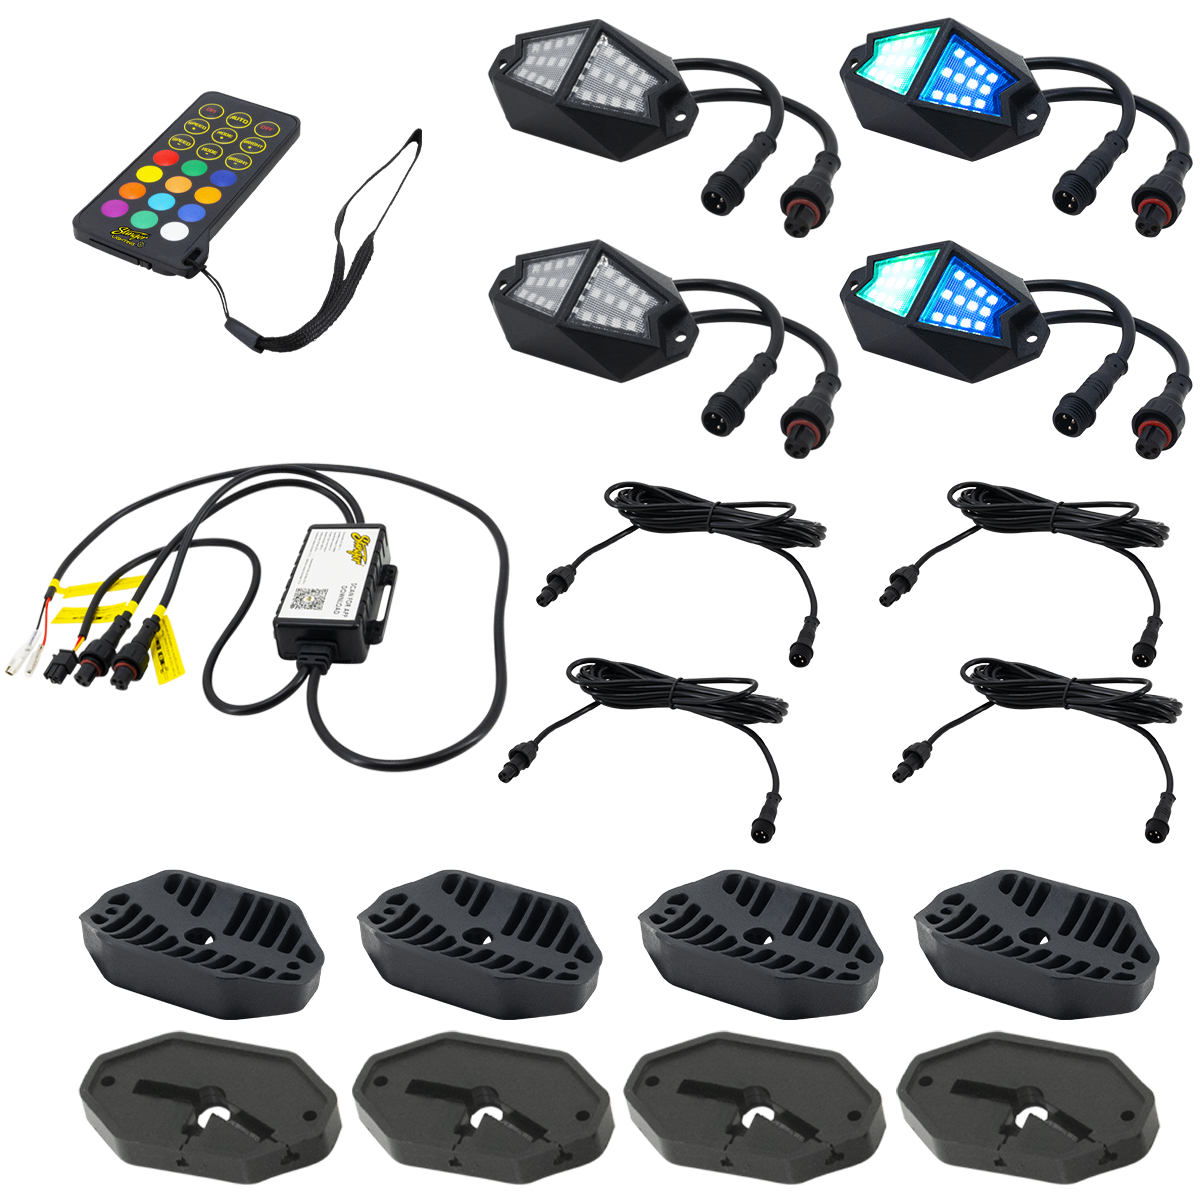 ENLIGHT10 4 Piece Plug-and-Play Dynamic RGB Rock Light Kit with Bluetooth Remote